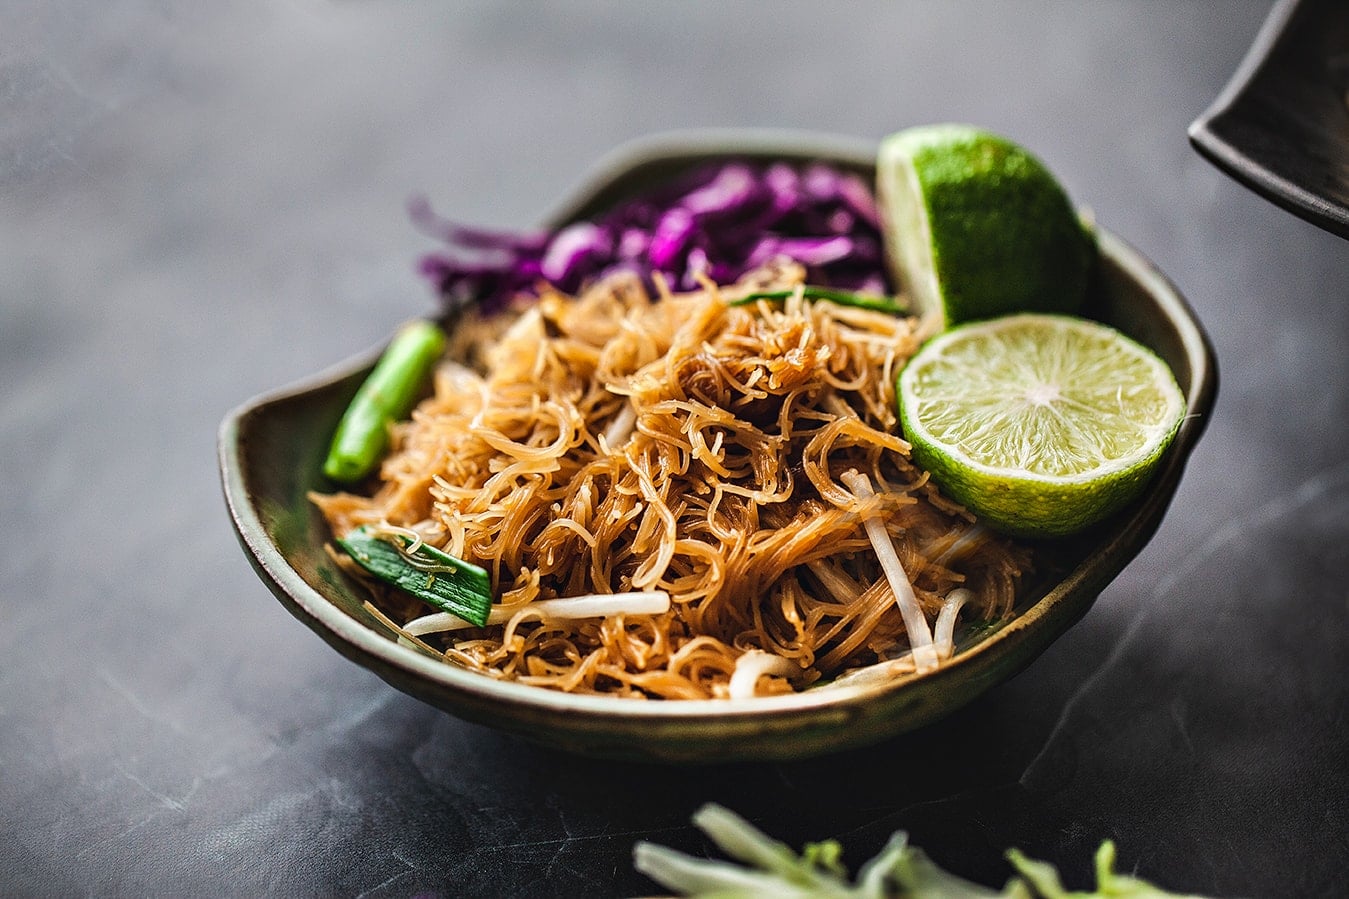 Pad ba mee noodles in a plate with lime garnish